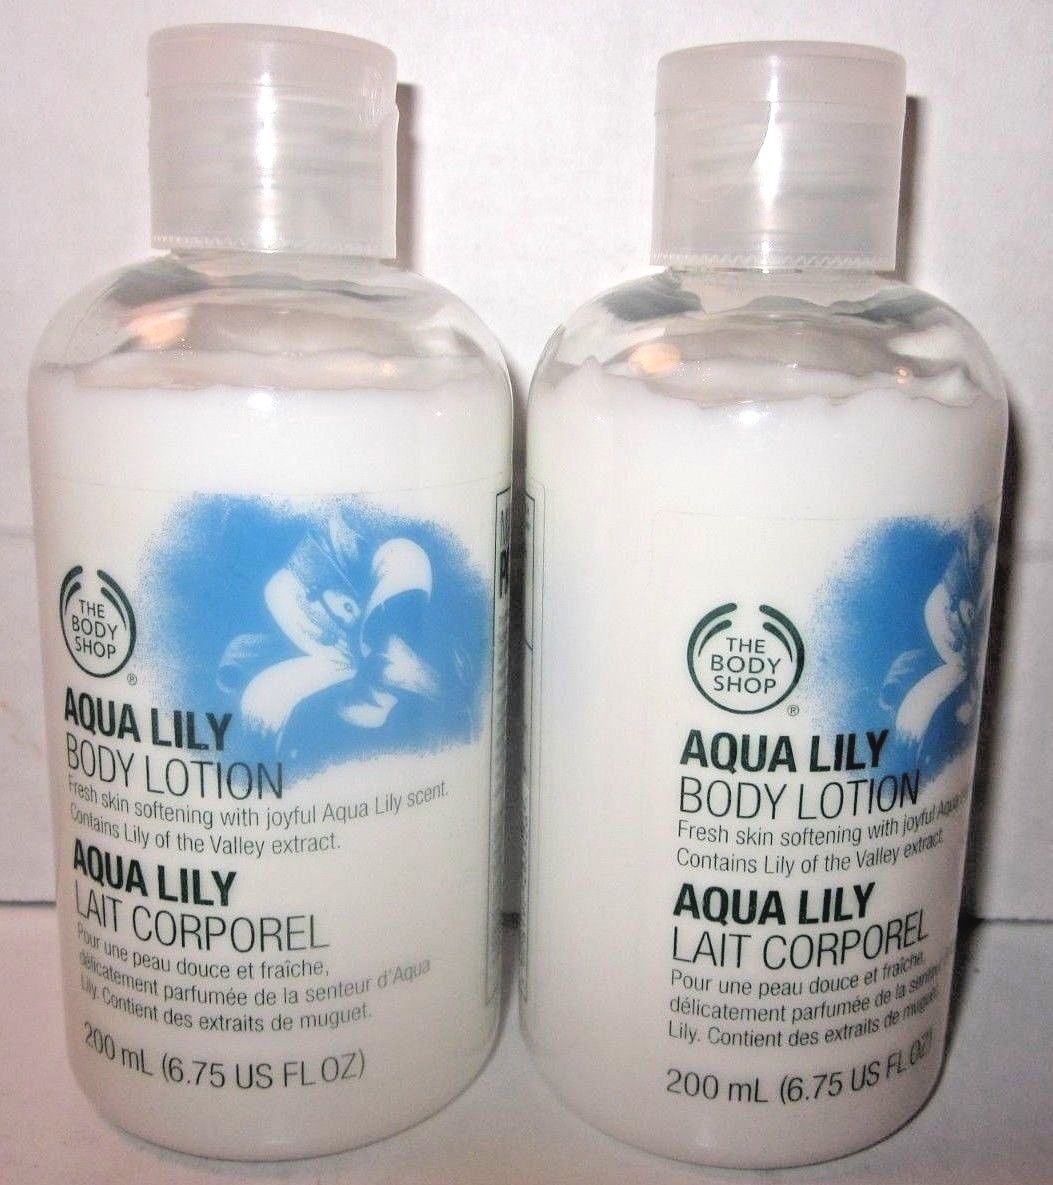 2 bottles The Body Shop Body Lotion 6.75 oz lily of the valley   Aqua Lily - $39.99